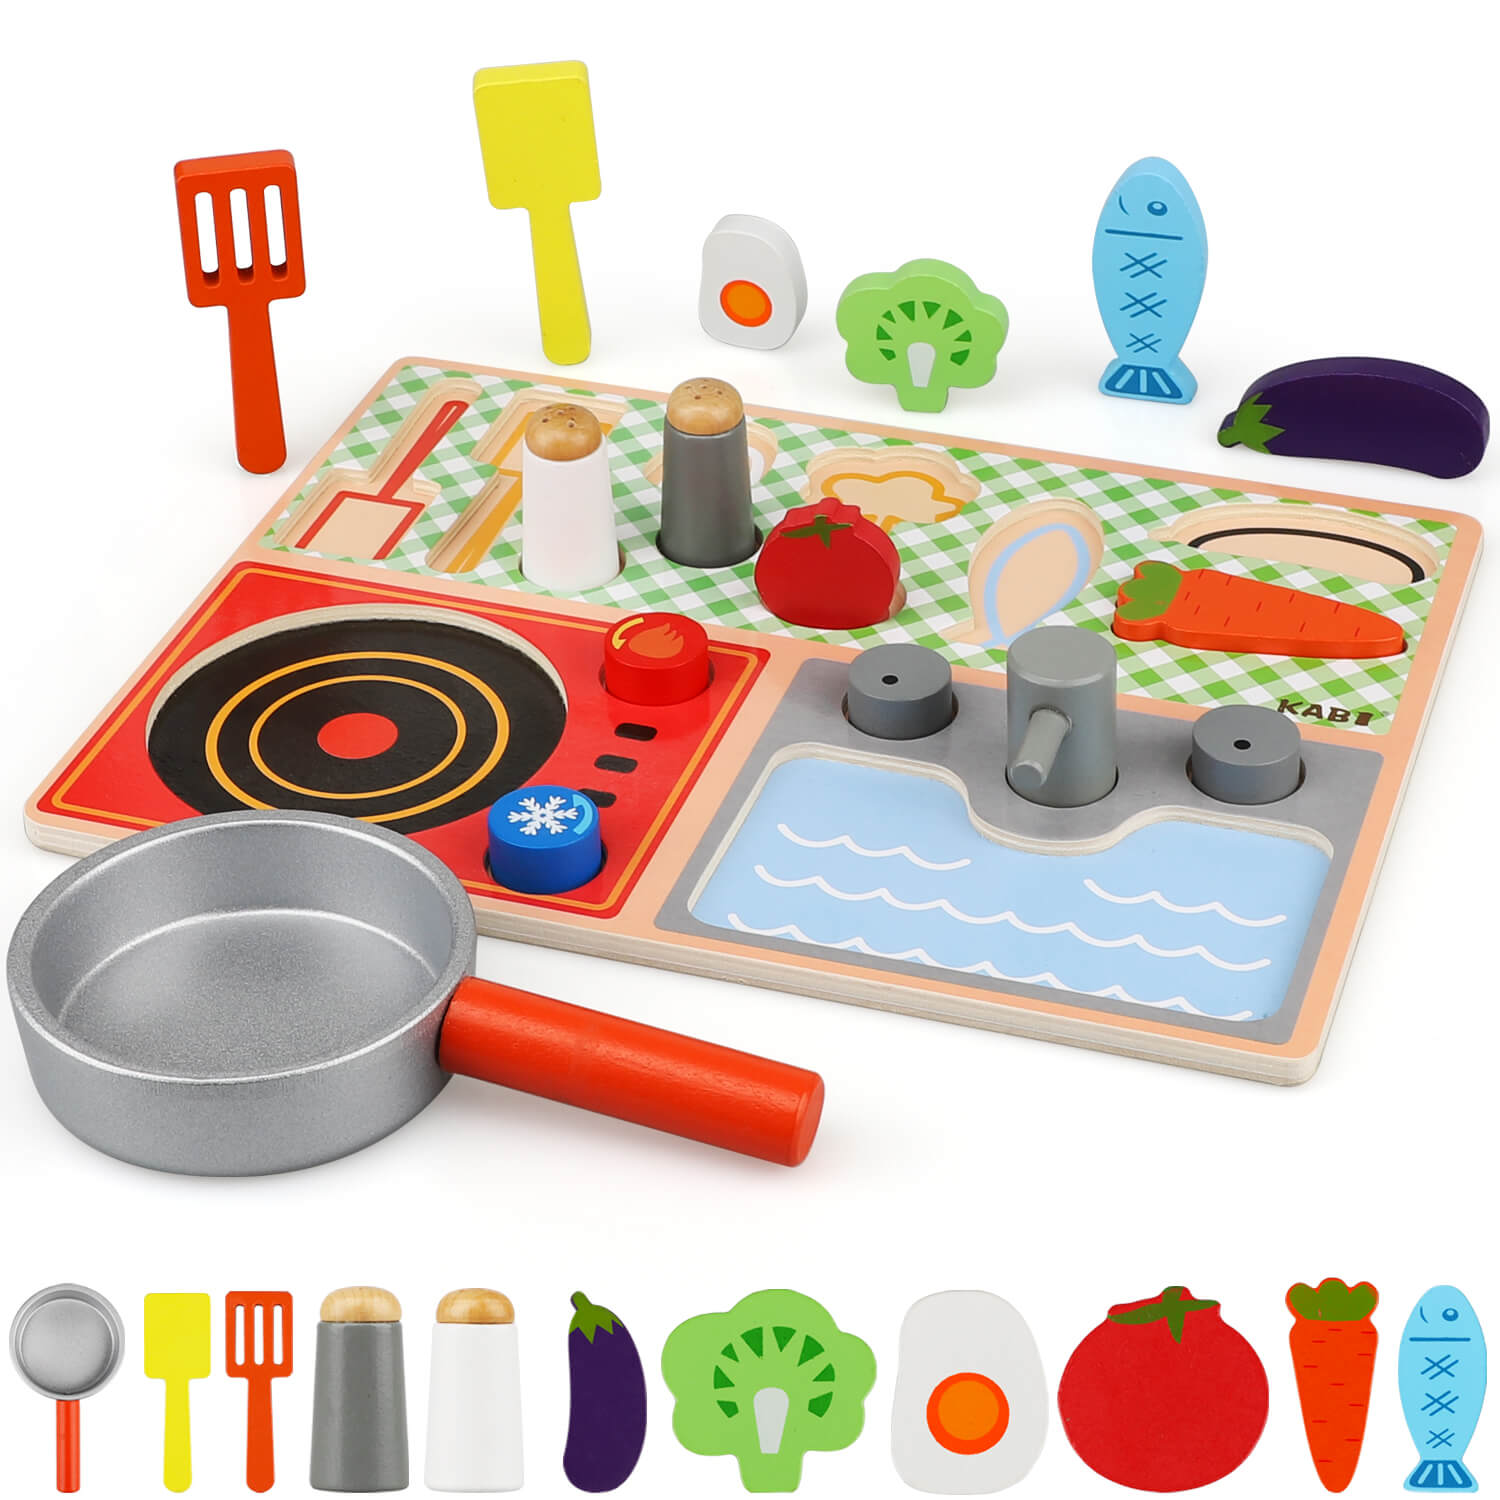 Toy Wooden Kitchen Sets for Kids